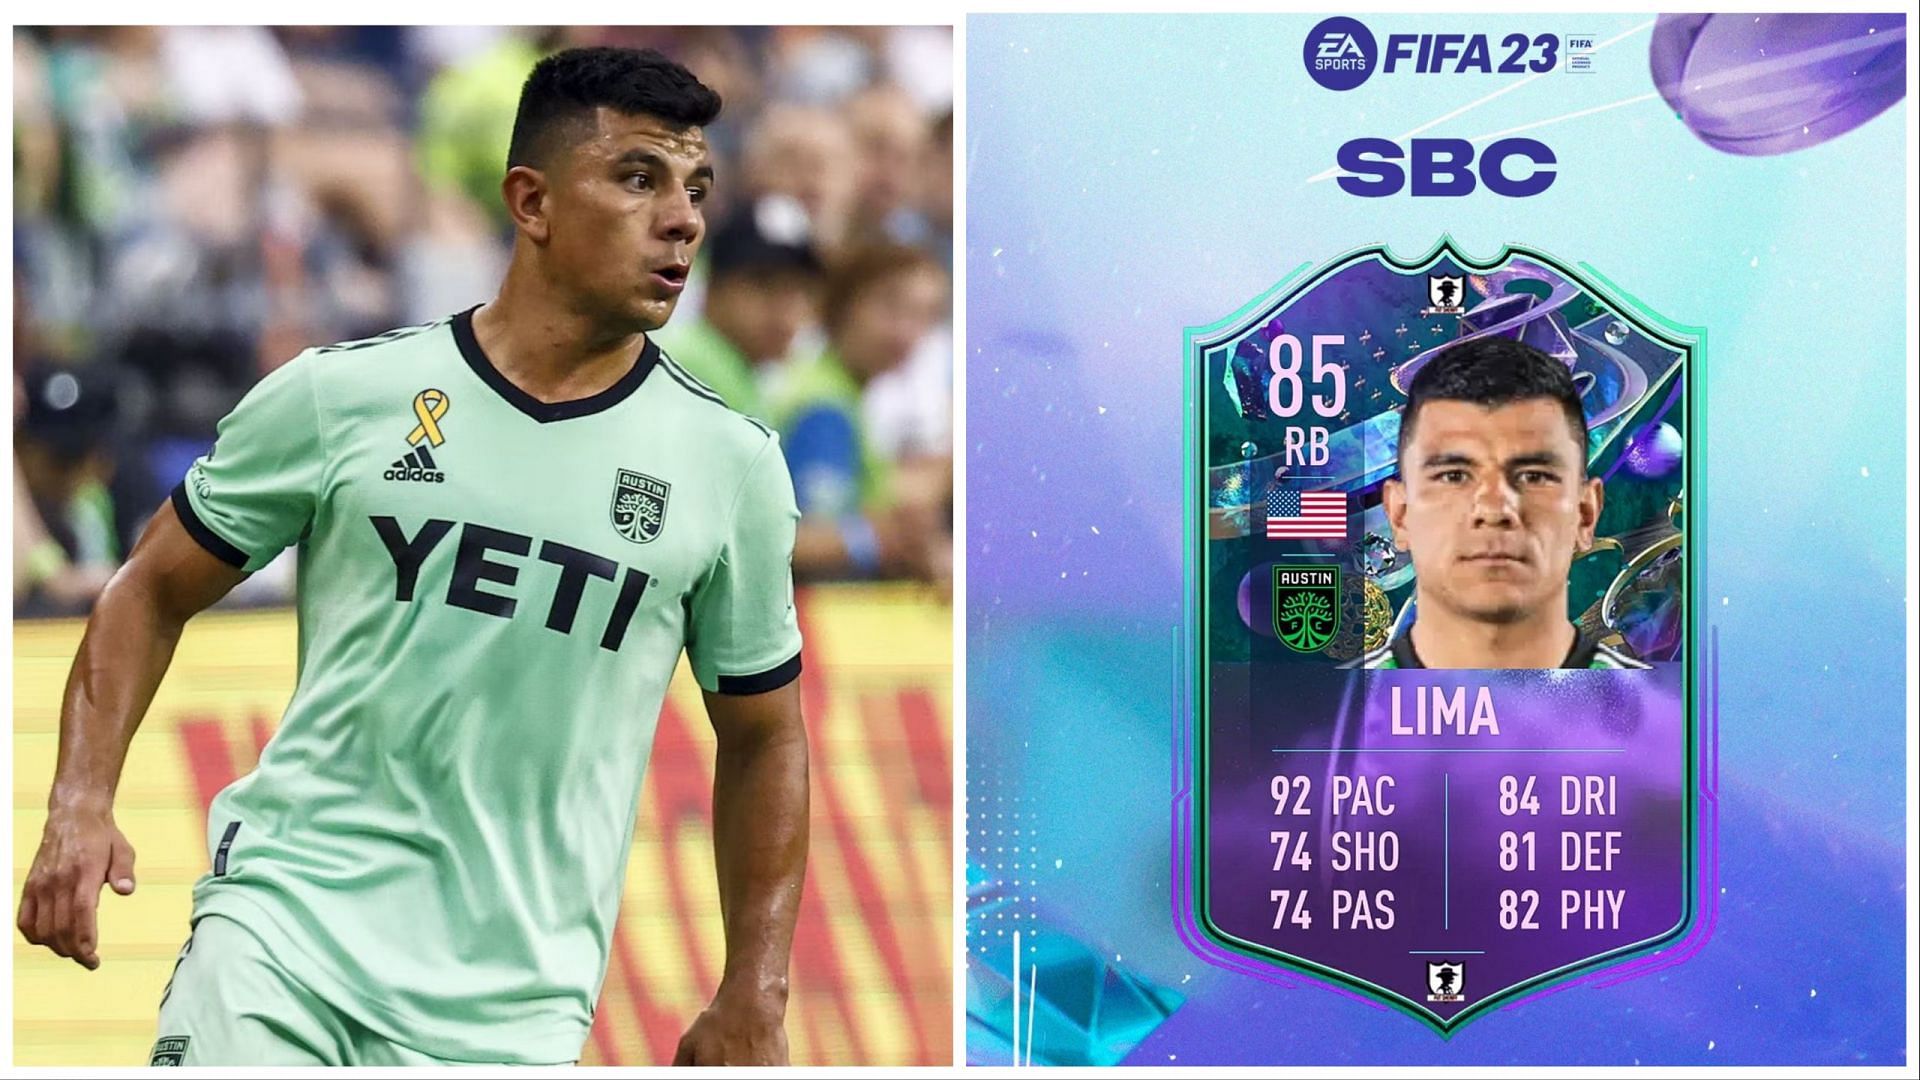 Fantasy FUT Nick Lima has been leaked (Images via Getty and Twitter/FUT Sheriff)